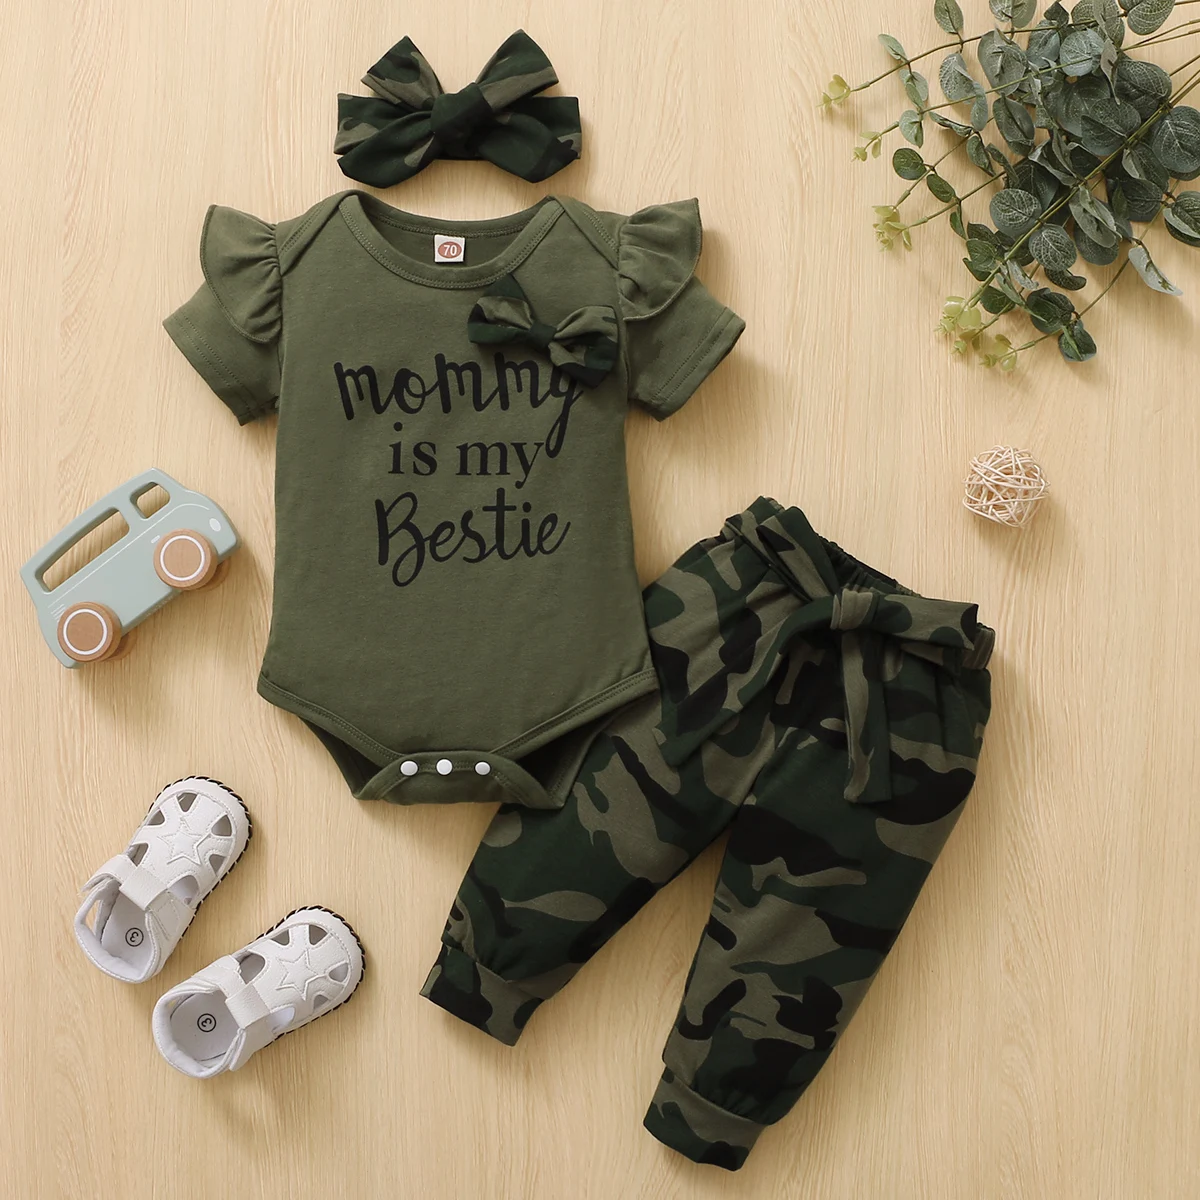 NCONCO Baby Girl Outfits Long Sleeve Romper Camouflage Pants with Headband Fashion Clothes 3Pcs/Set 